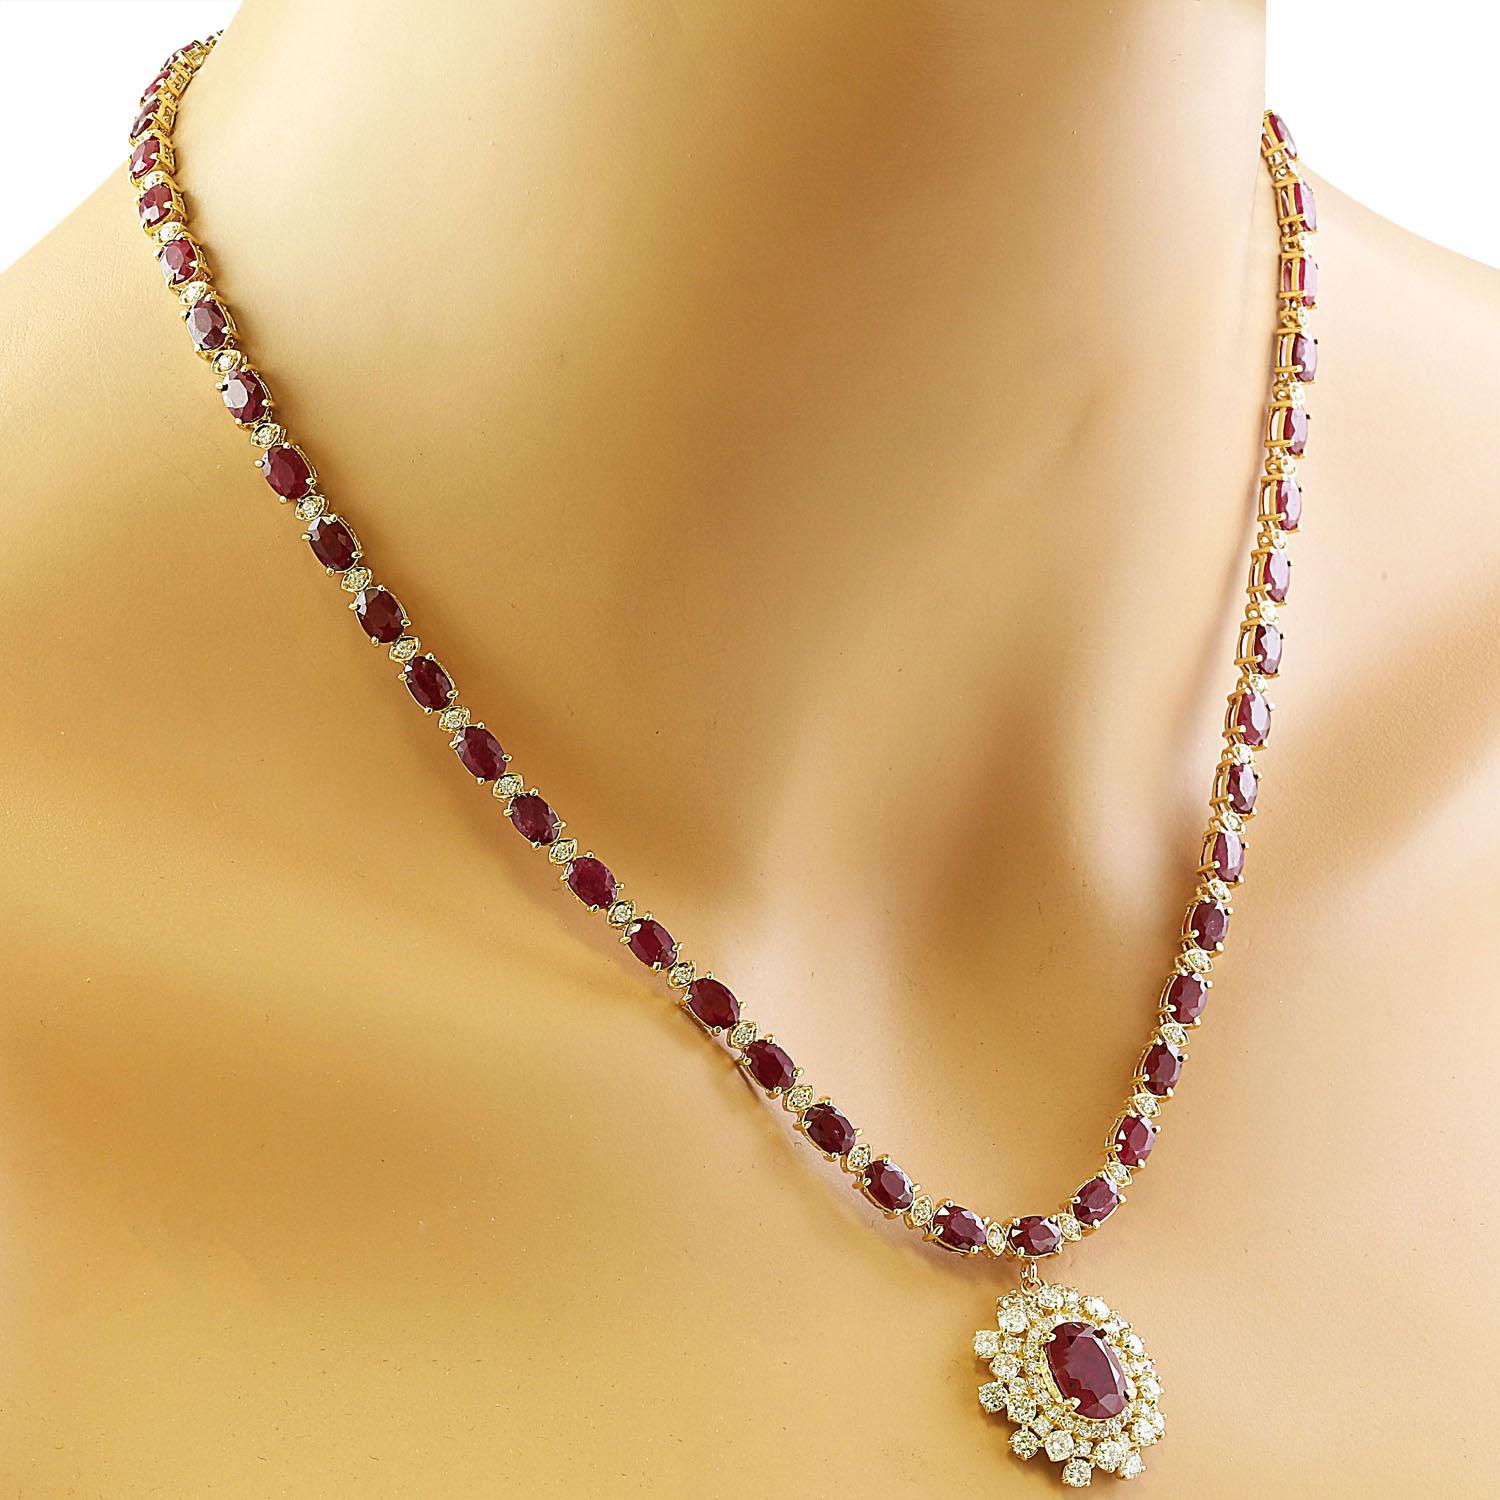 33.63 Carat Natural Ruby 14 Karat Solid Yellow Gold Diamond Necklace
Stamped: 14K
Total Necklace Weight: 25.6 Grams
Necklace Length: 18 Inches
Center Ruby Weight: 3.33 Carat (11.00x9.00 Millimeters)
Side Ruby Weight: 27.00 Carat (6.00x4.00